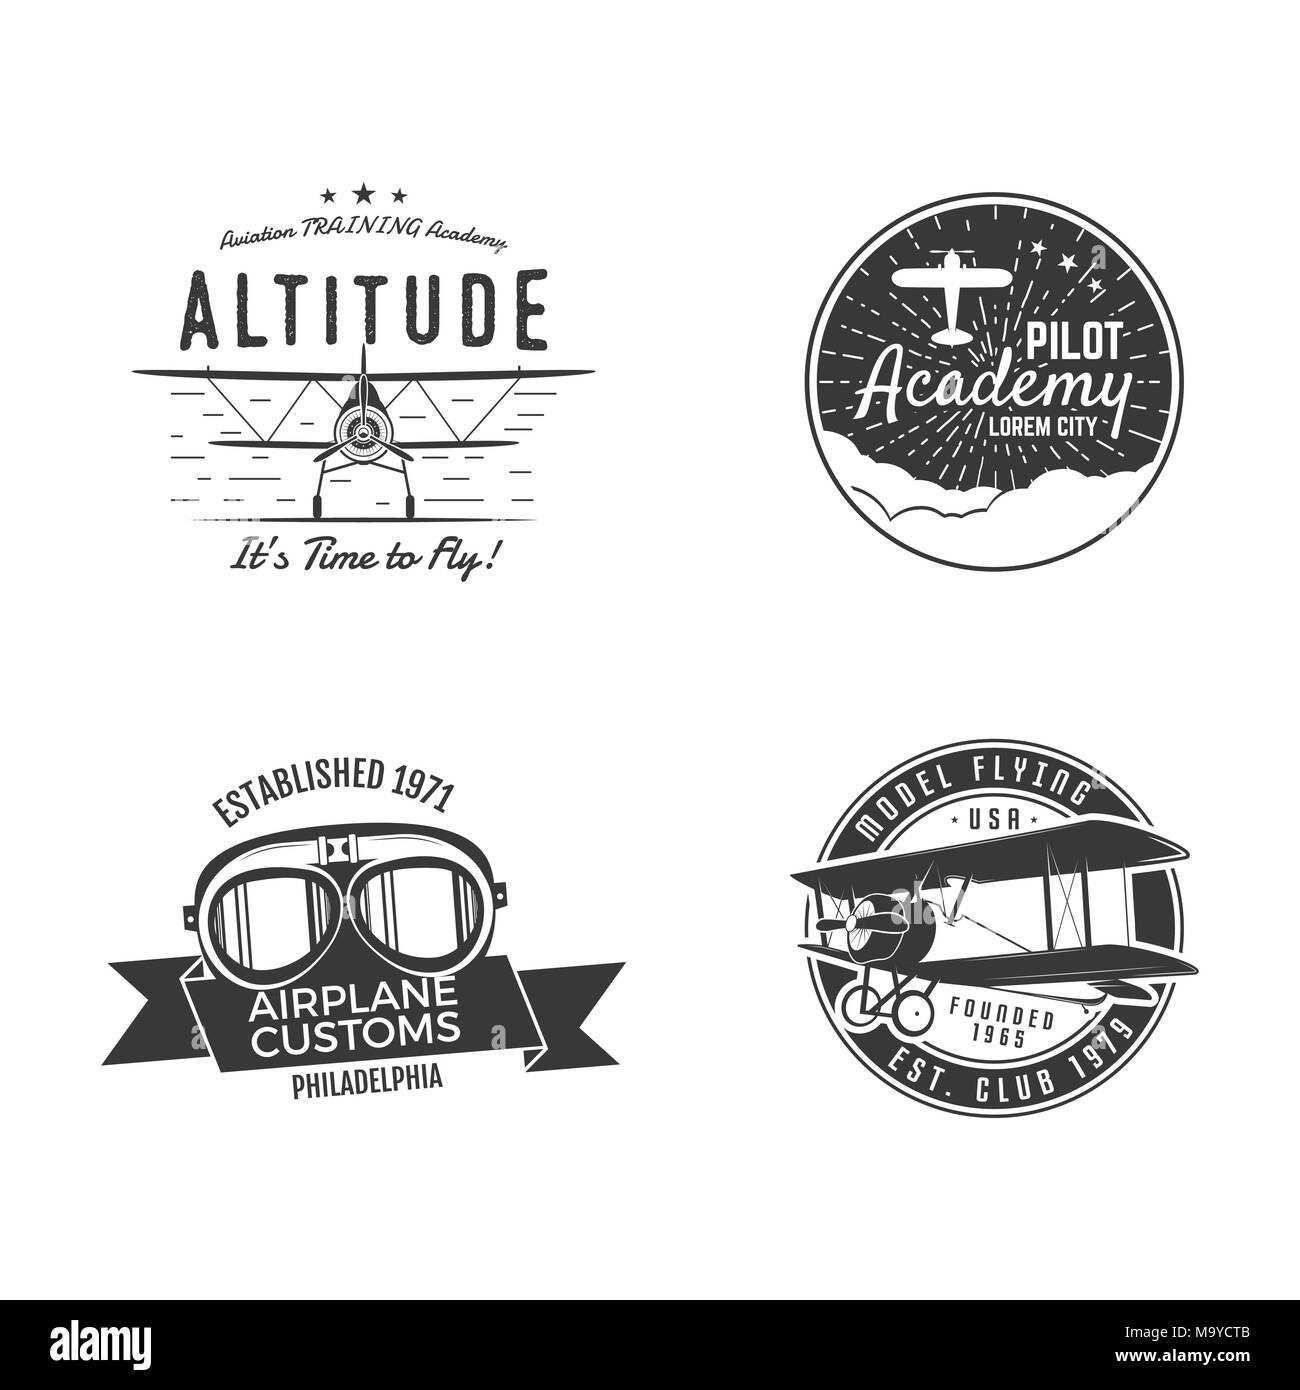 Vintage hand drawn old fly stamps. Travel or business airplane tour emblems. Airplane logo designs. Retro aerial badge. Pilot school logos. Plane tee design, prints. Stock vector stamps isolated Stock Vector